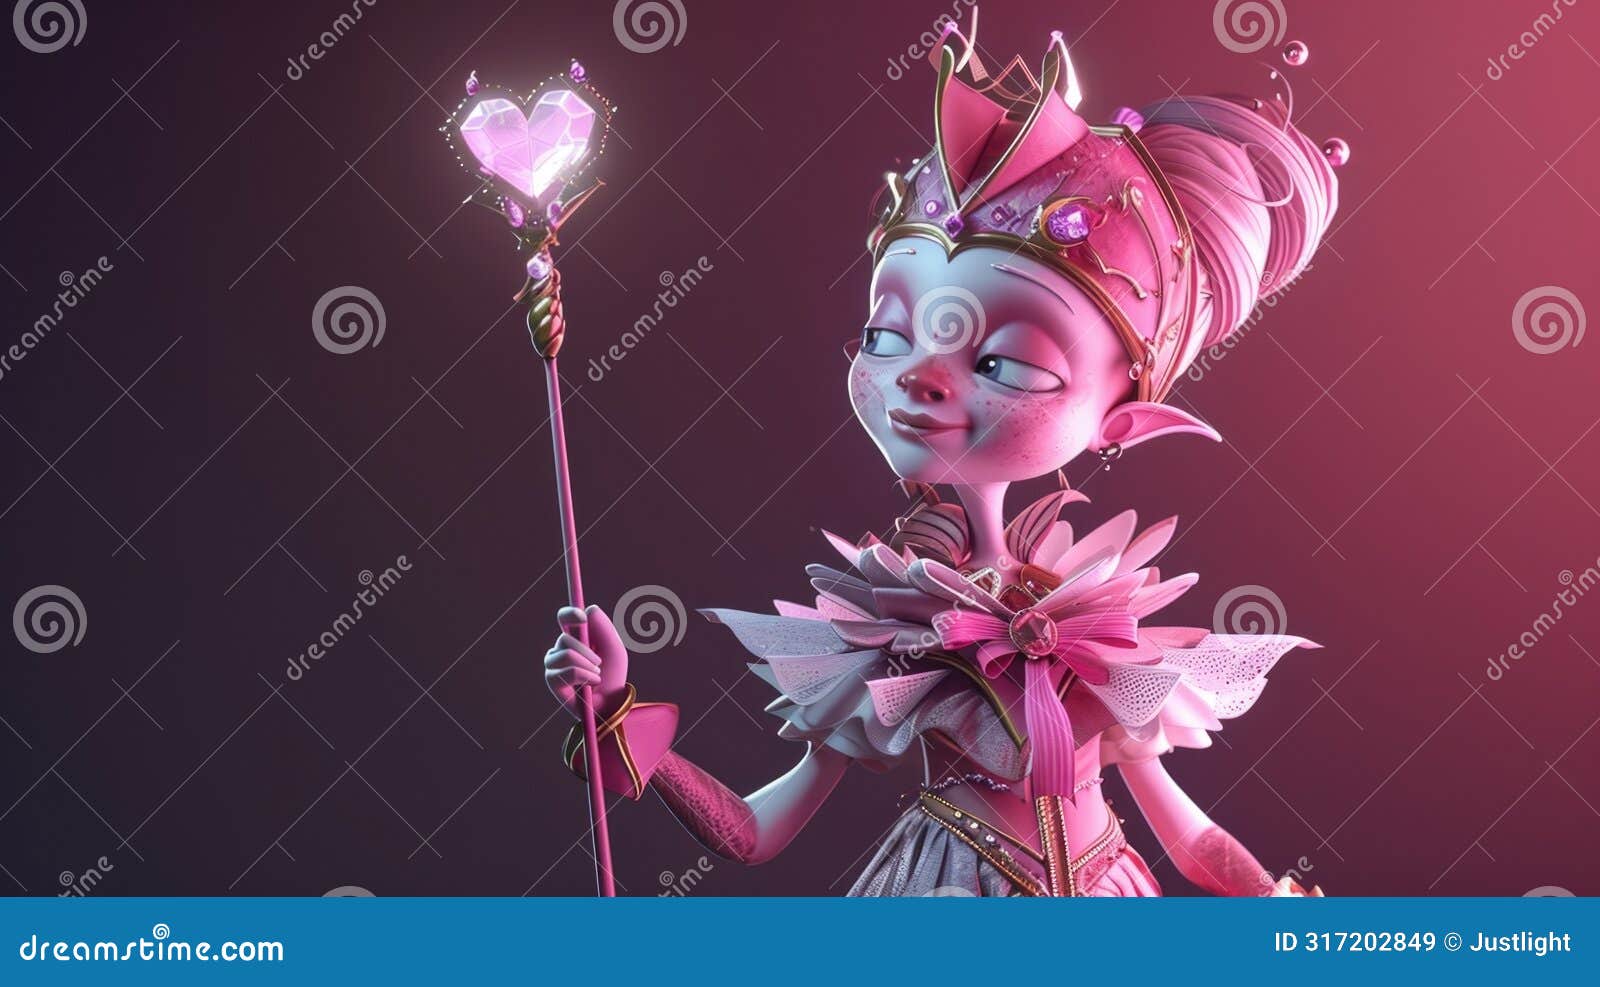 cartoon digital avatars of mystical genie with pink skin, a frilly pink and white outfit, and a wand with a heartd